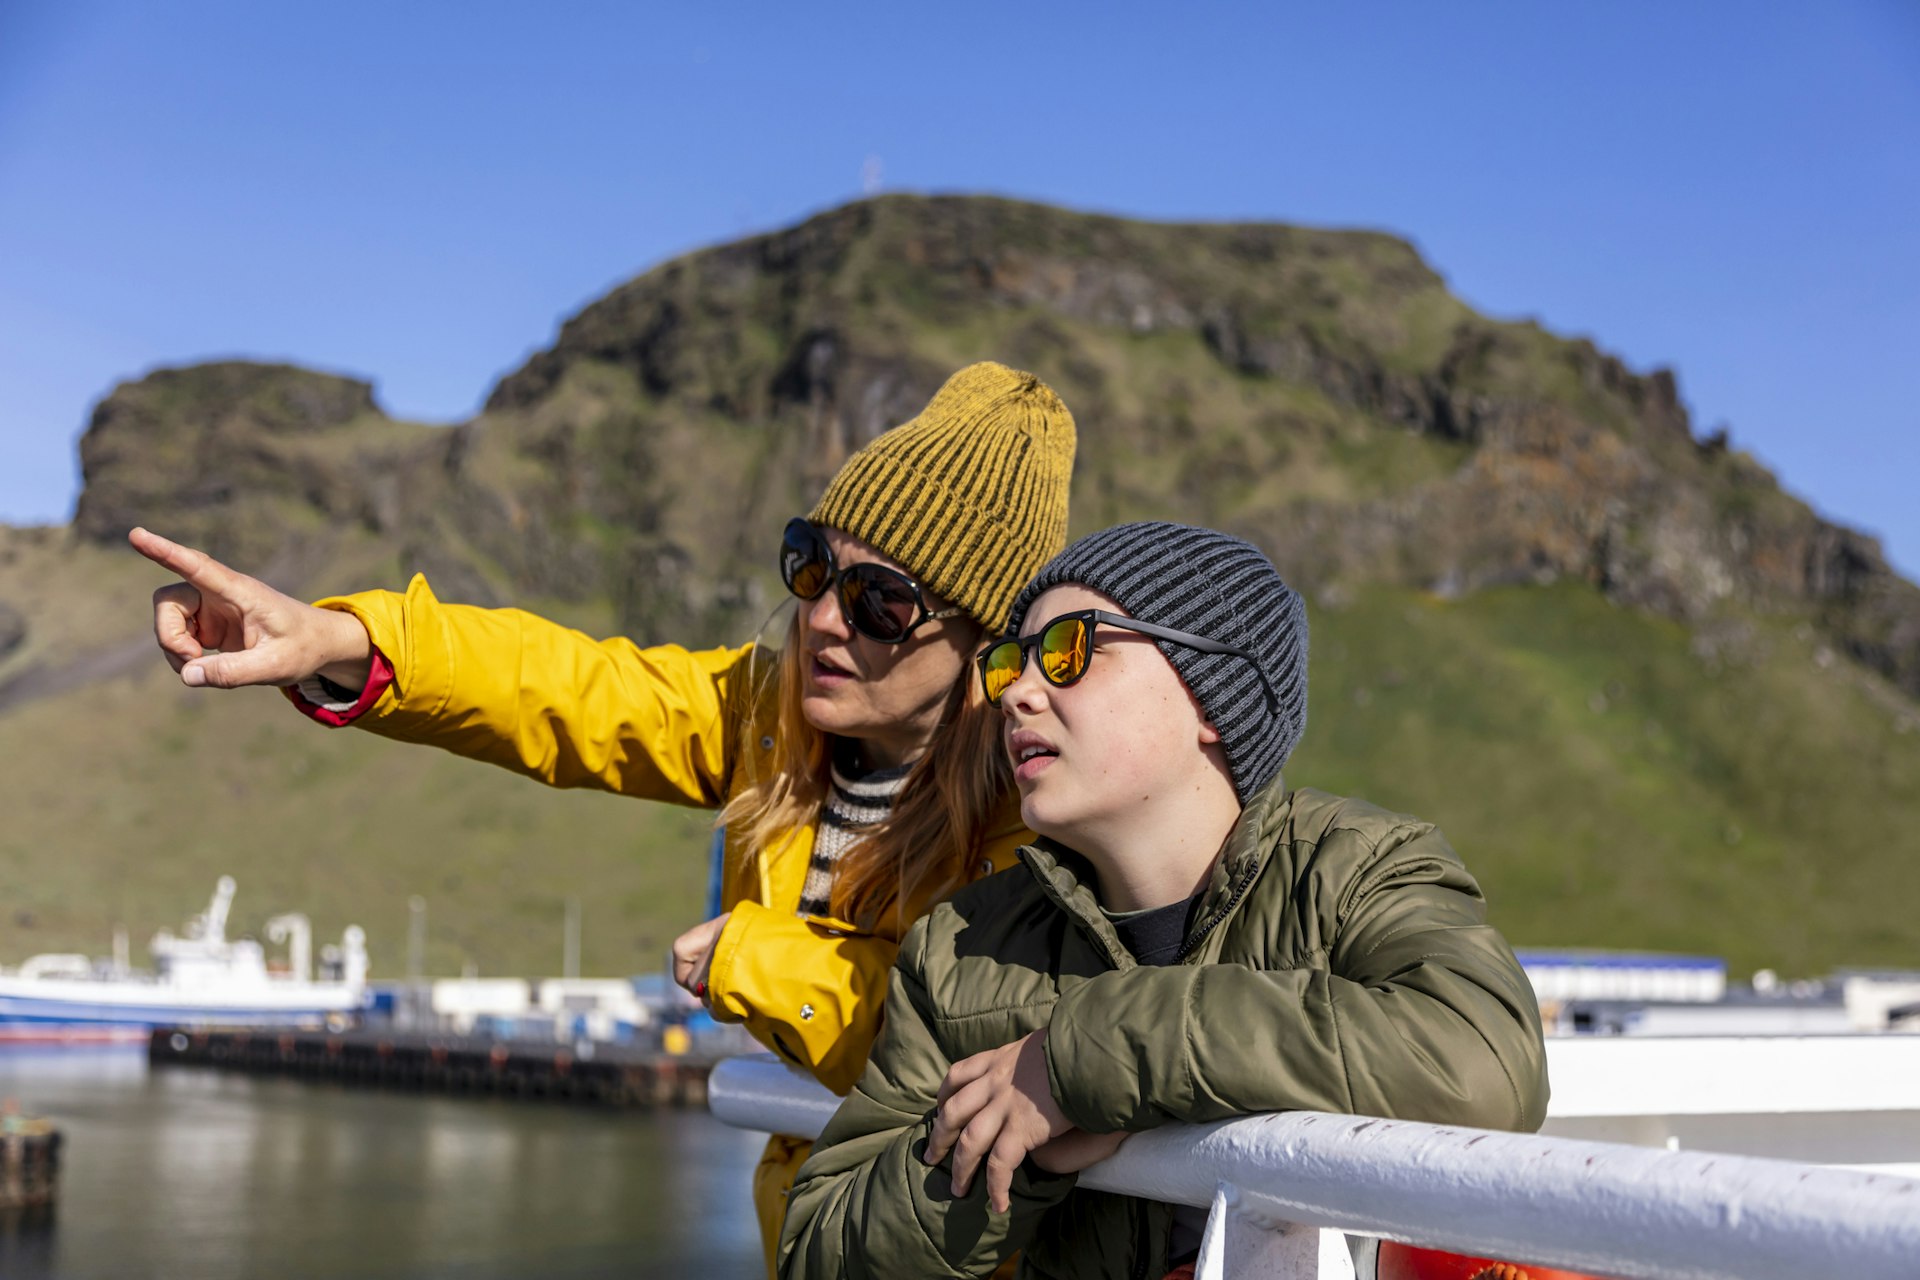 Mother and son are traveling to Westman island by ferry in Iceland